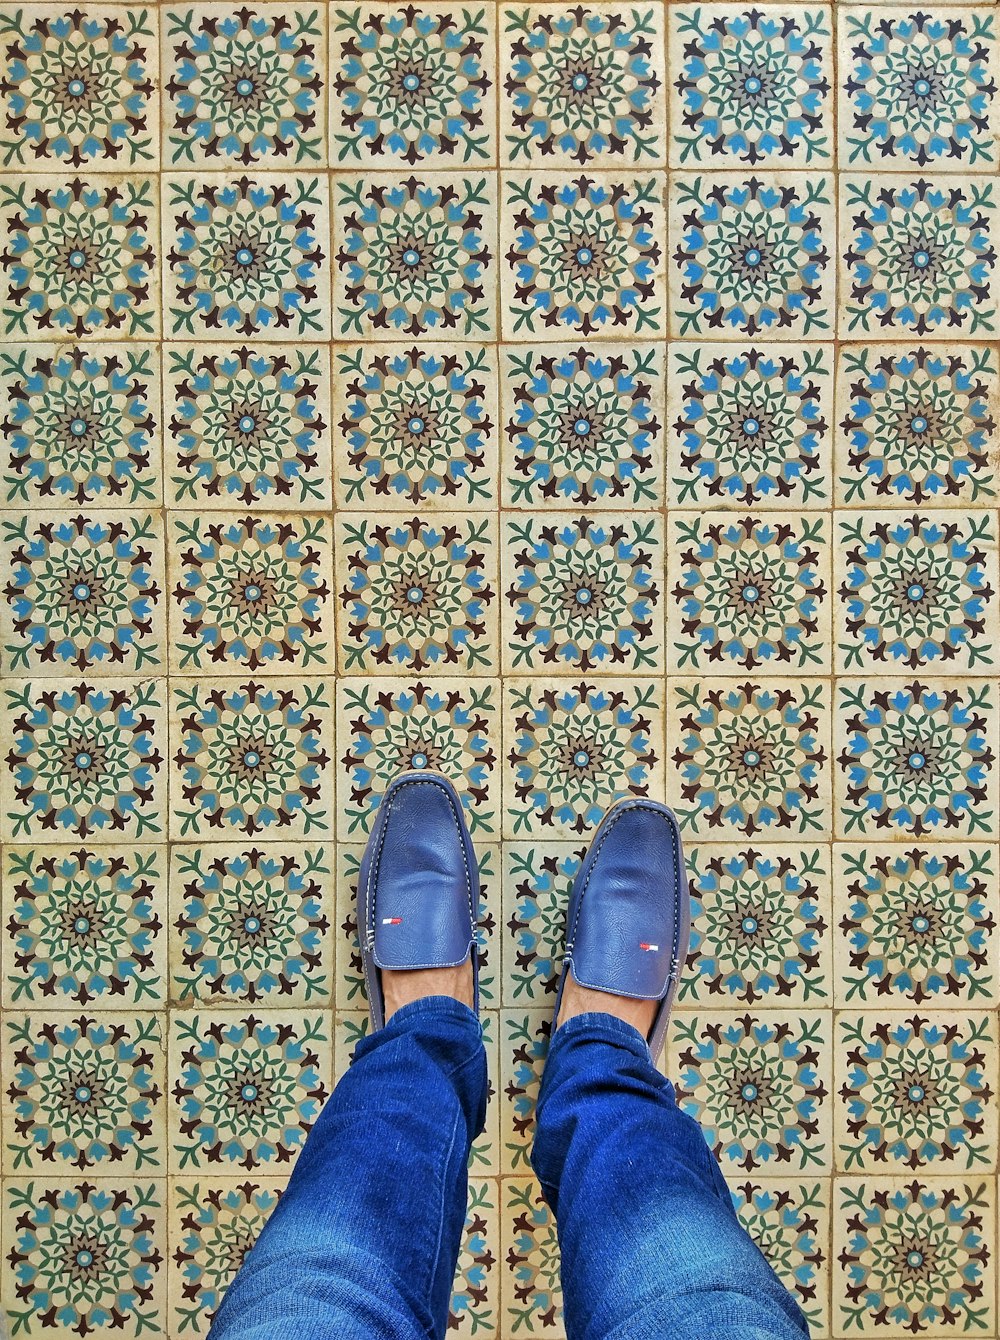 a person standing on a tiled floor with blue shoes